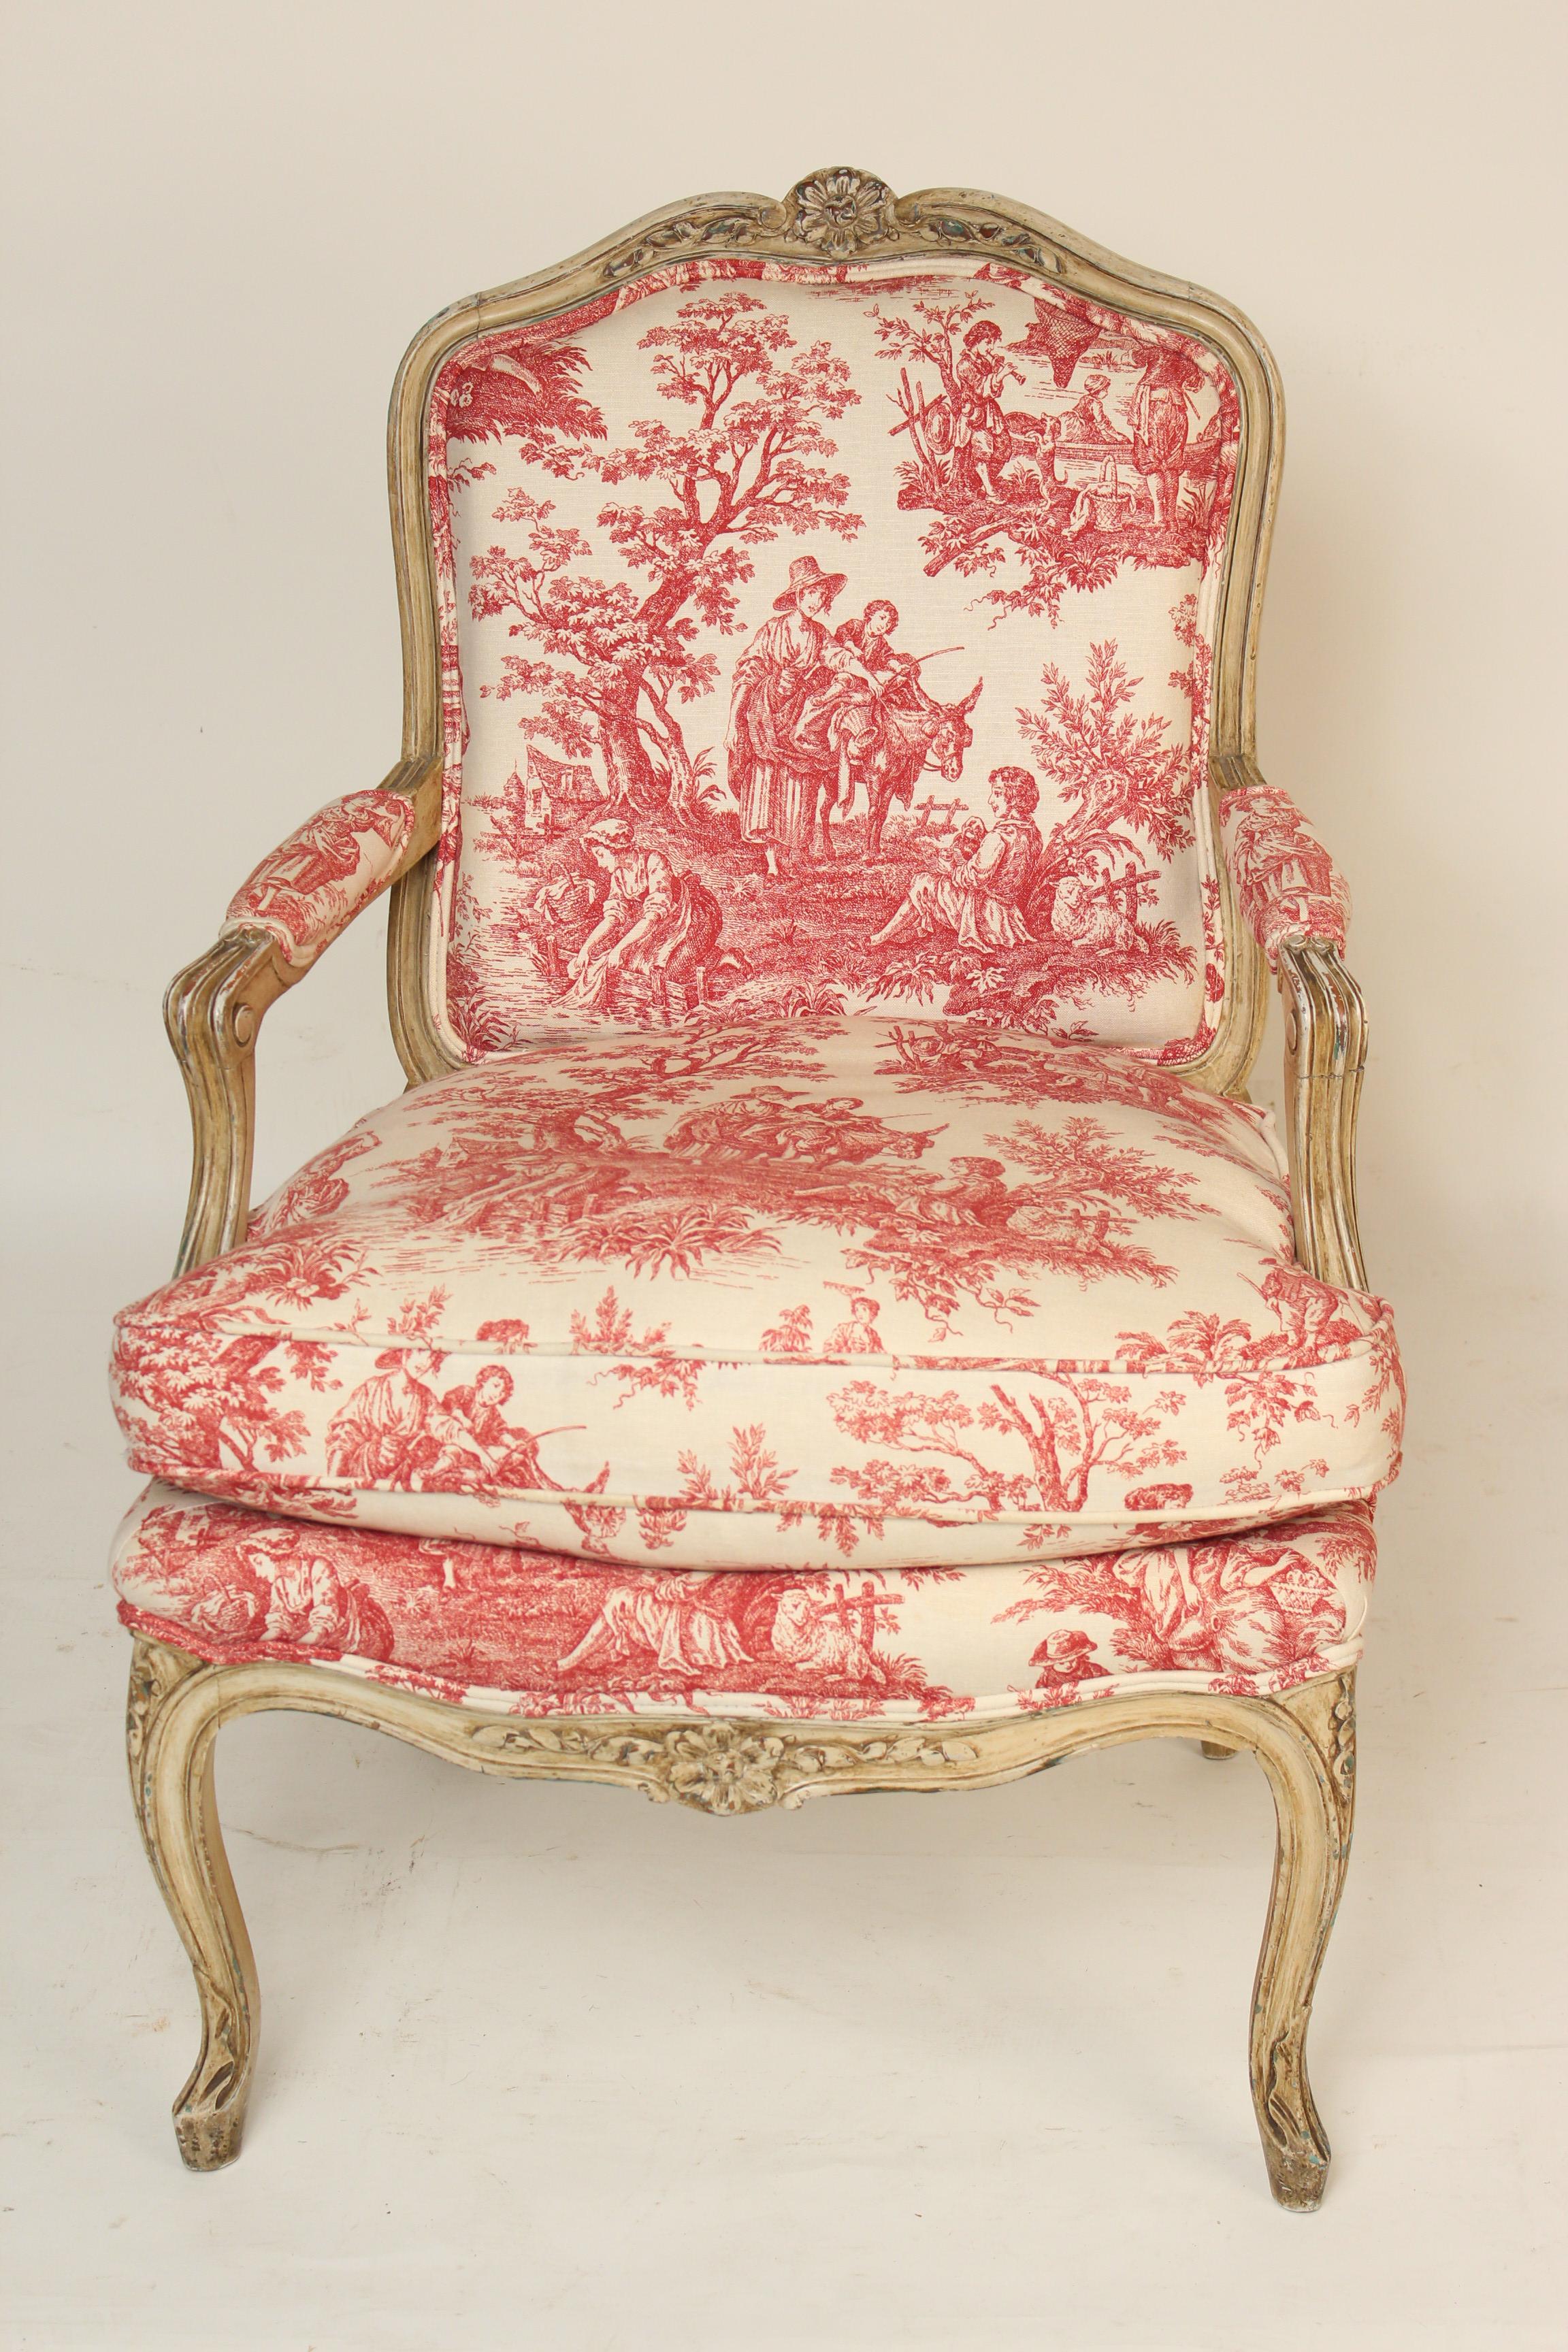 Louis XV Provincial style painted armchair with red toile upholstery, circa 1930. The seat cushion is 50% goose feathers and 50% down.